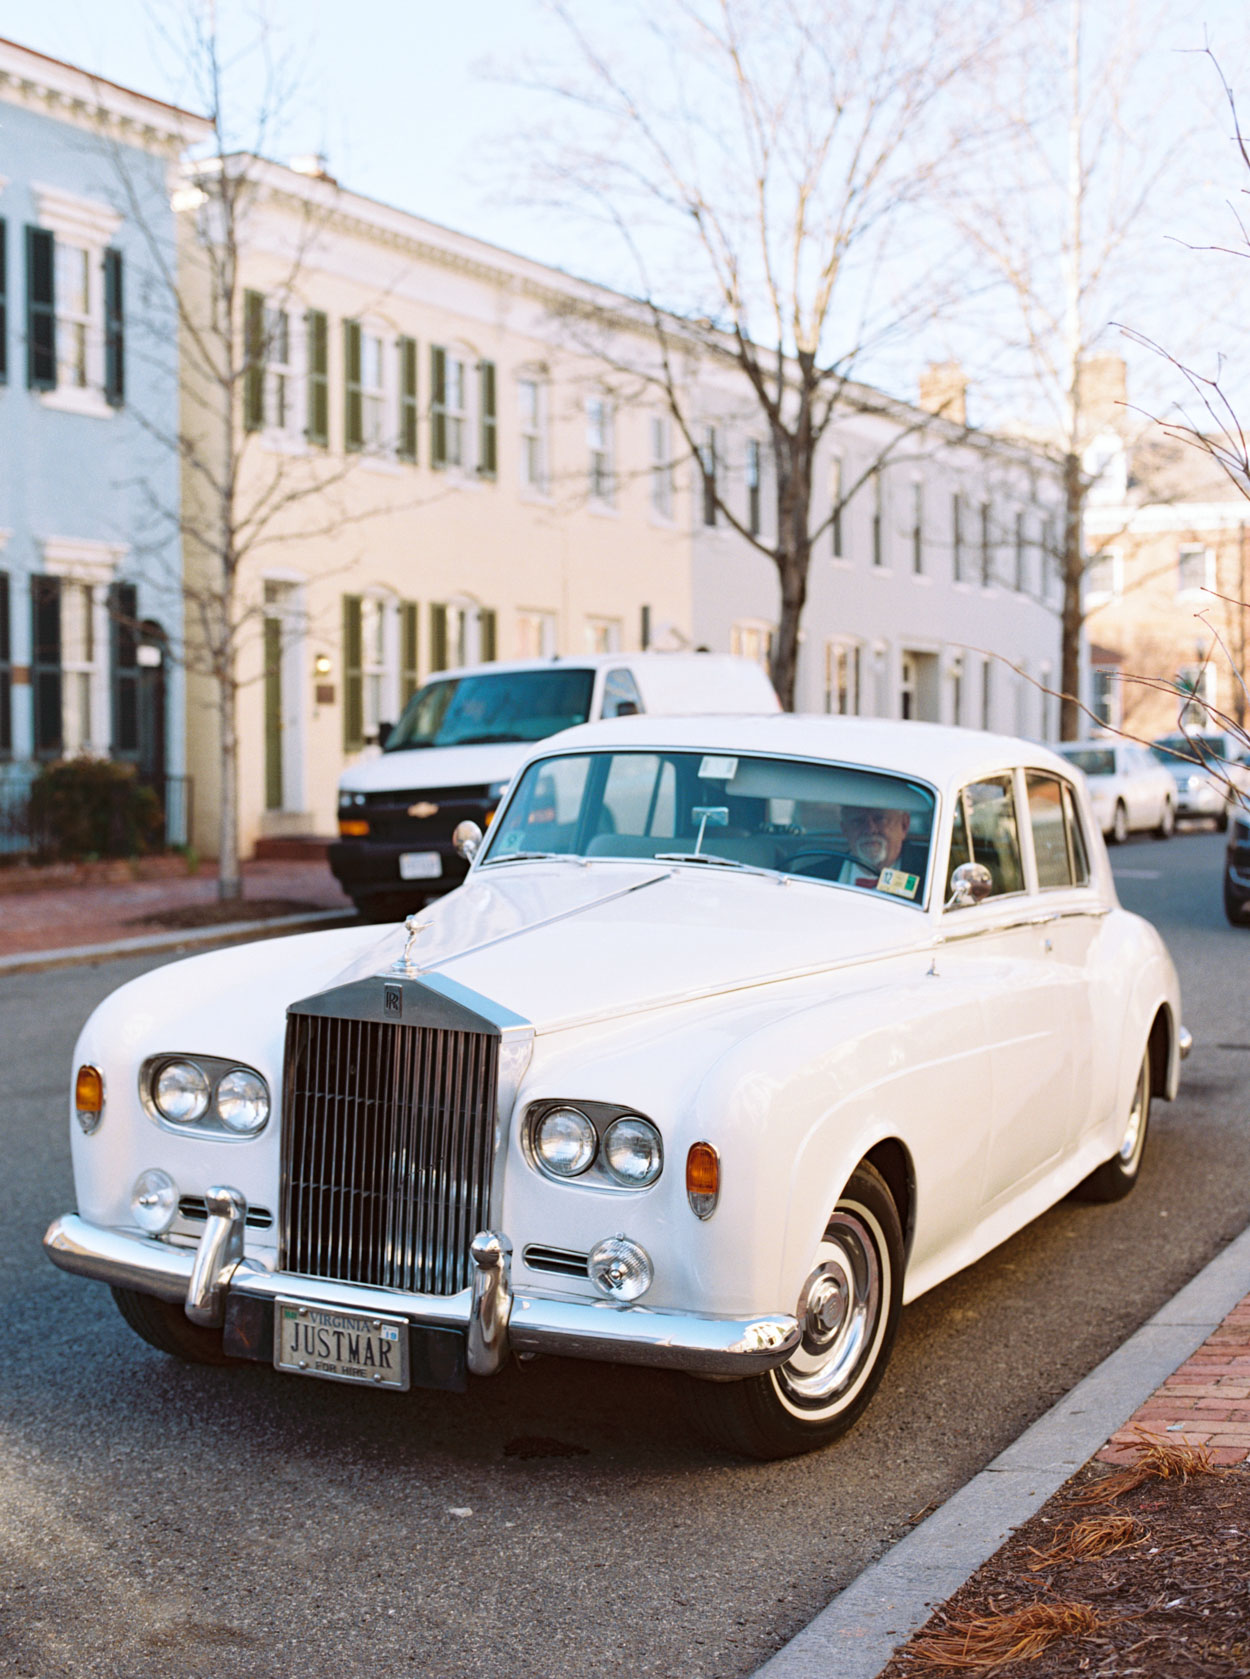 Classic Rolls Royce awaits to pick up bride and groom in Georgetown after marriage ceremony